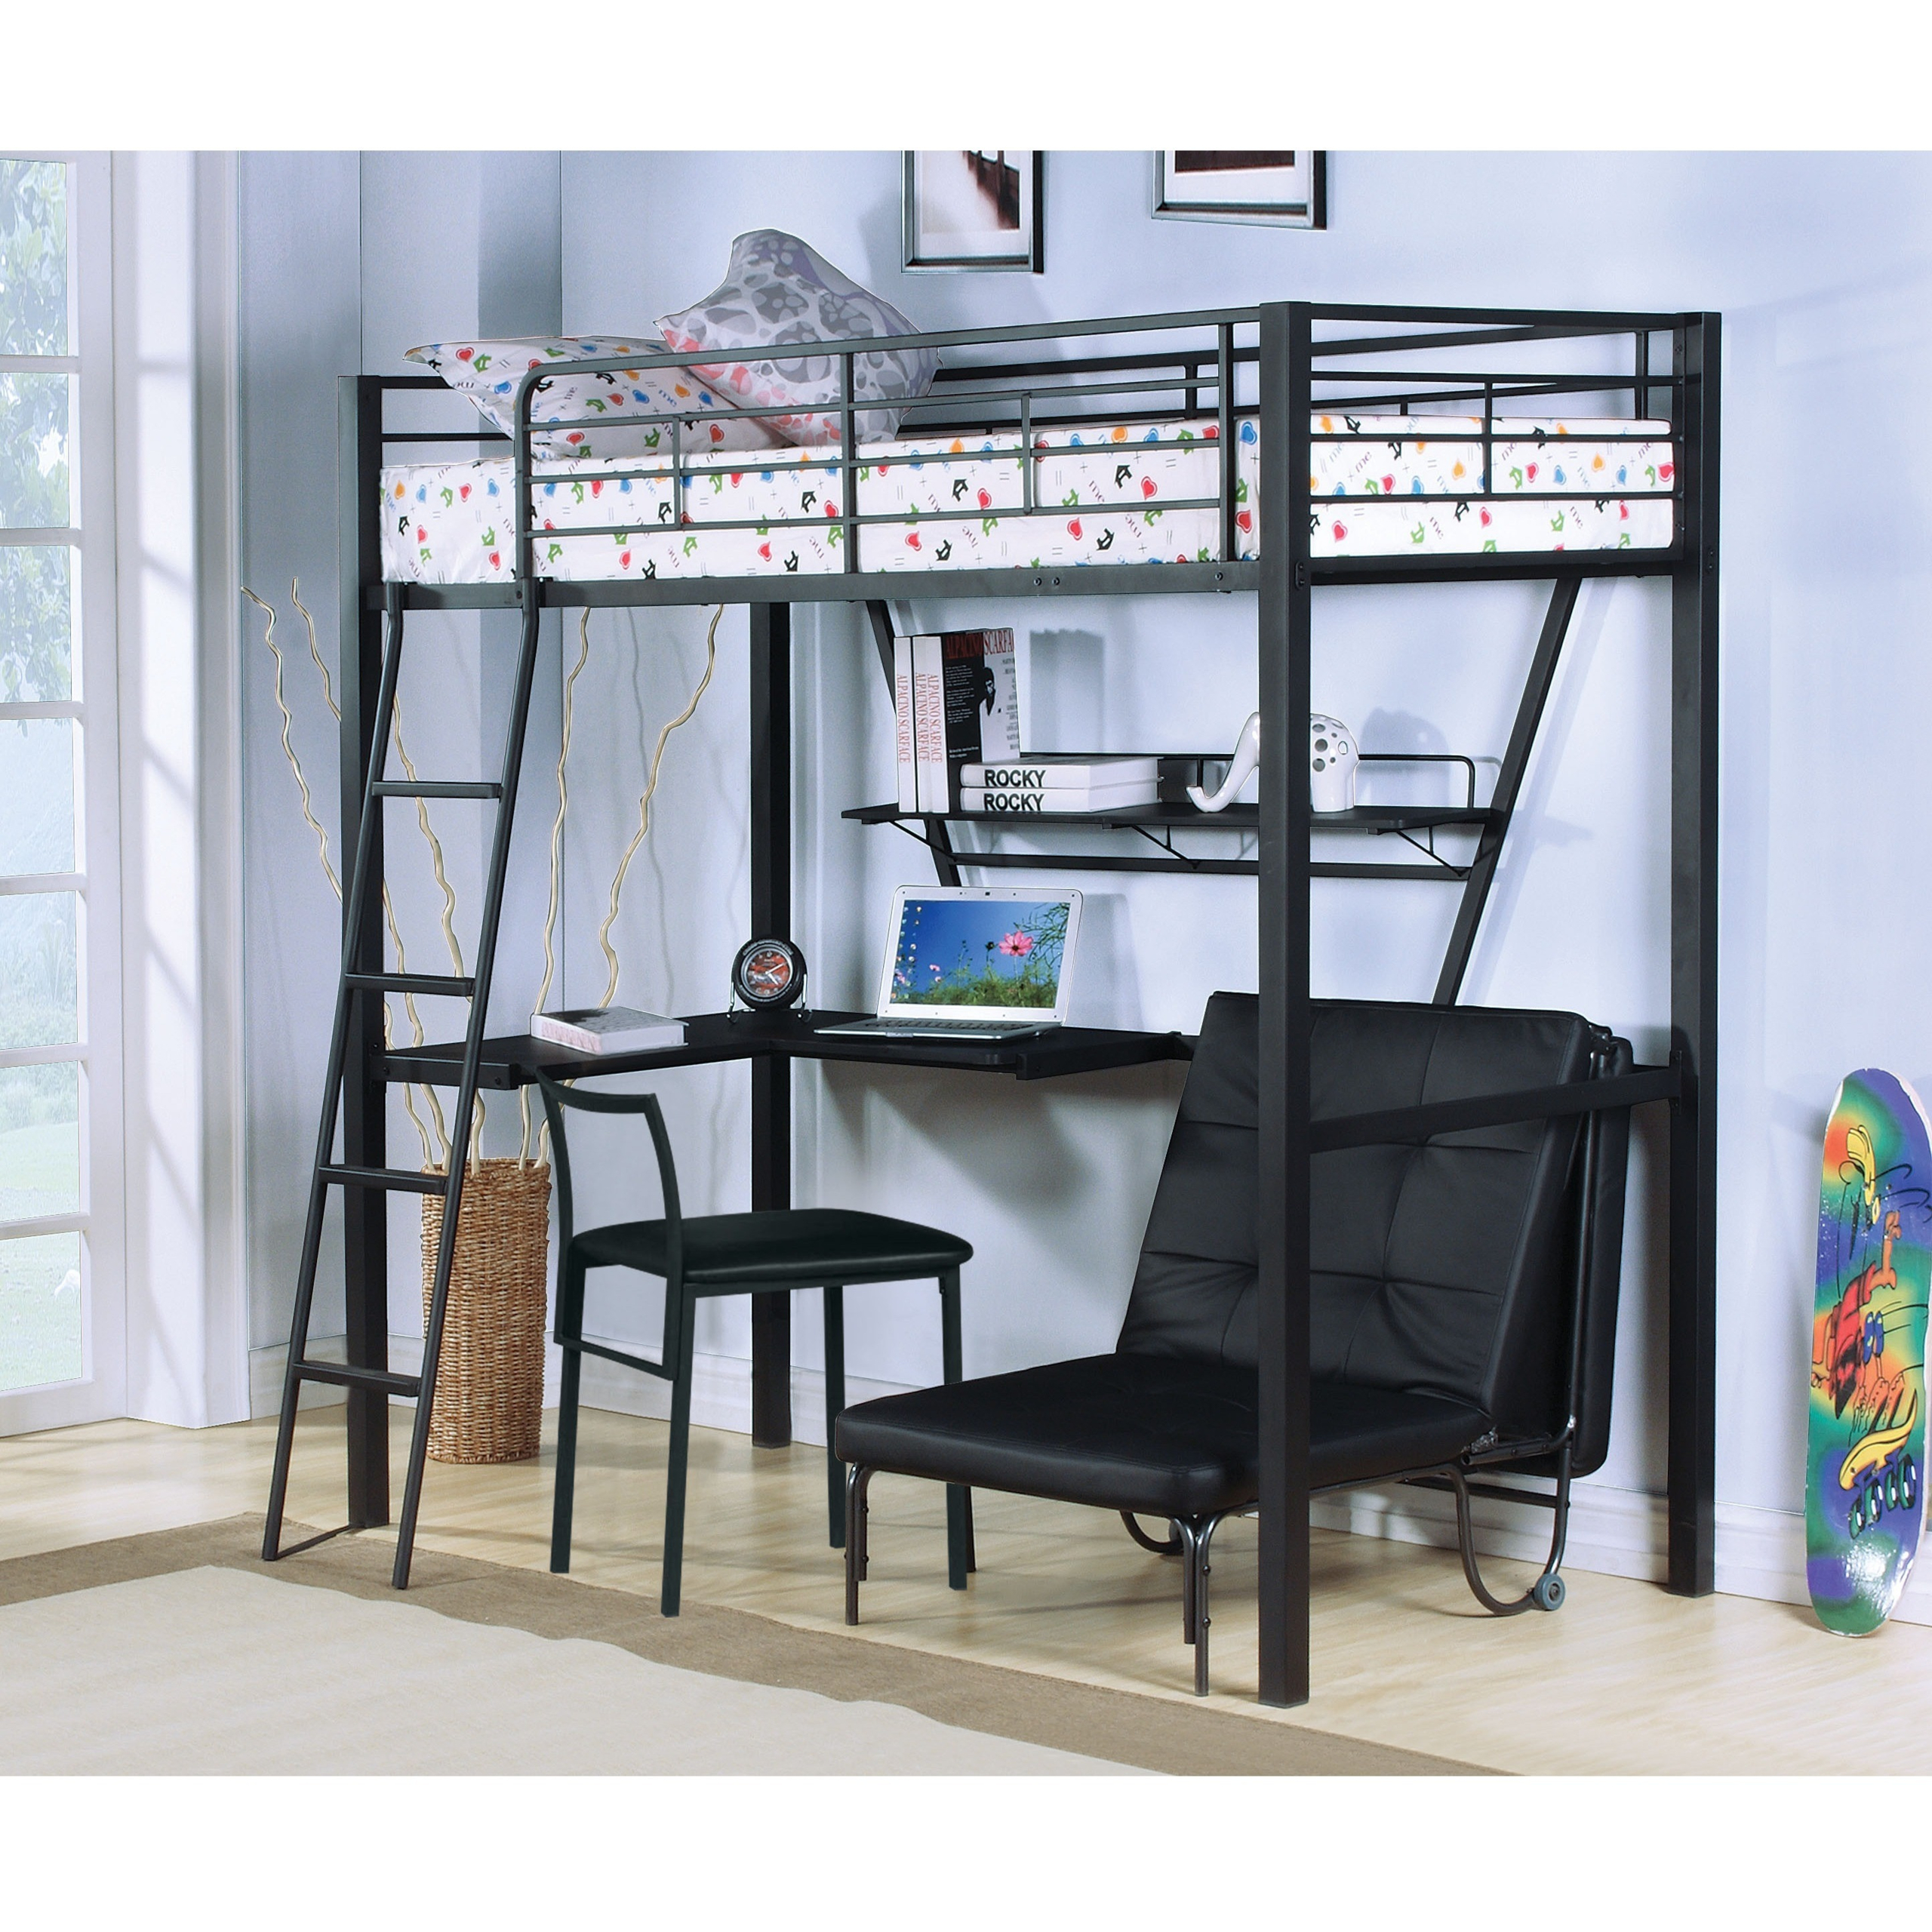 Bunk Bed With Desk And Chair Er, Bunk Bed With Chair And Desk